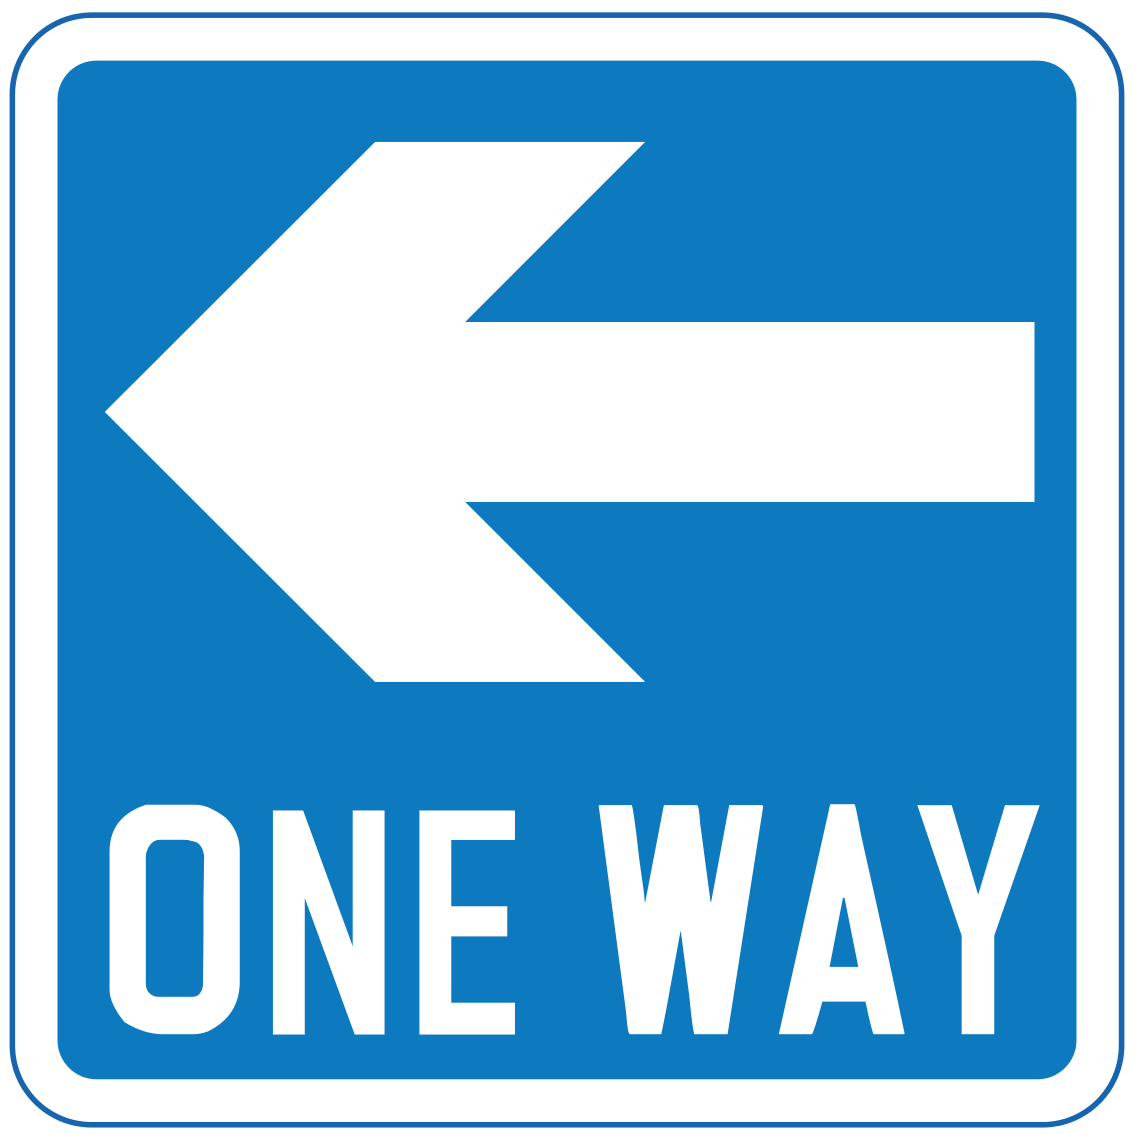 One-way traffic in direction indicated (left)